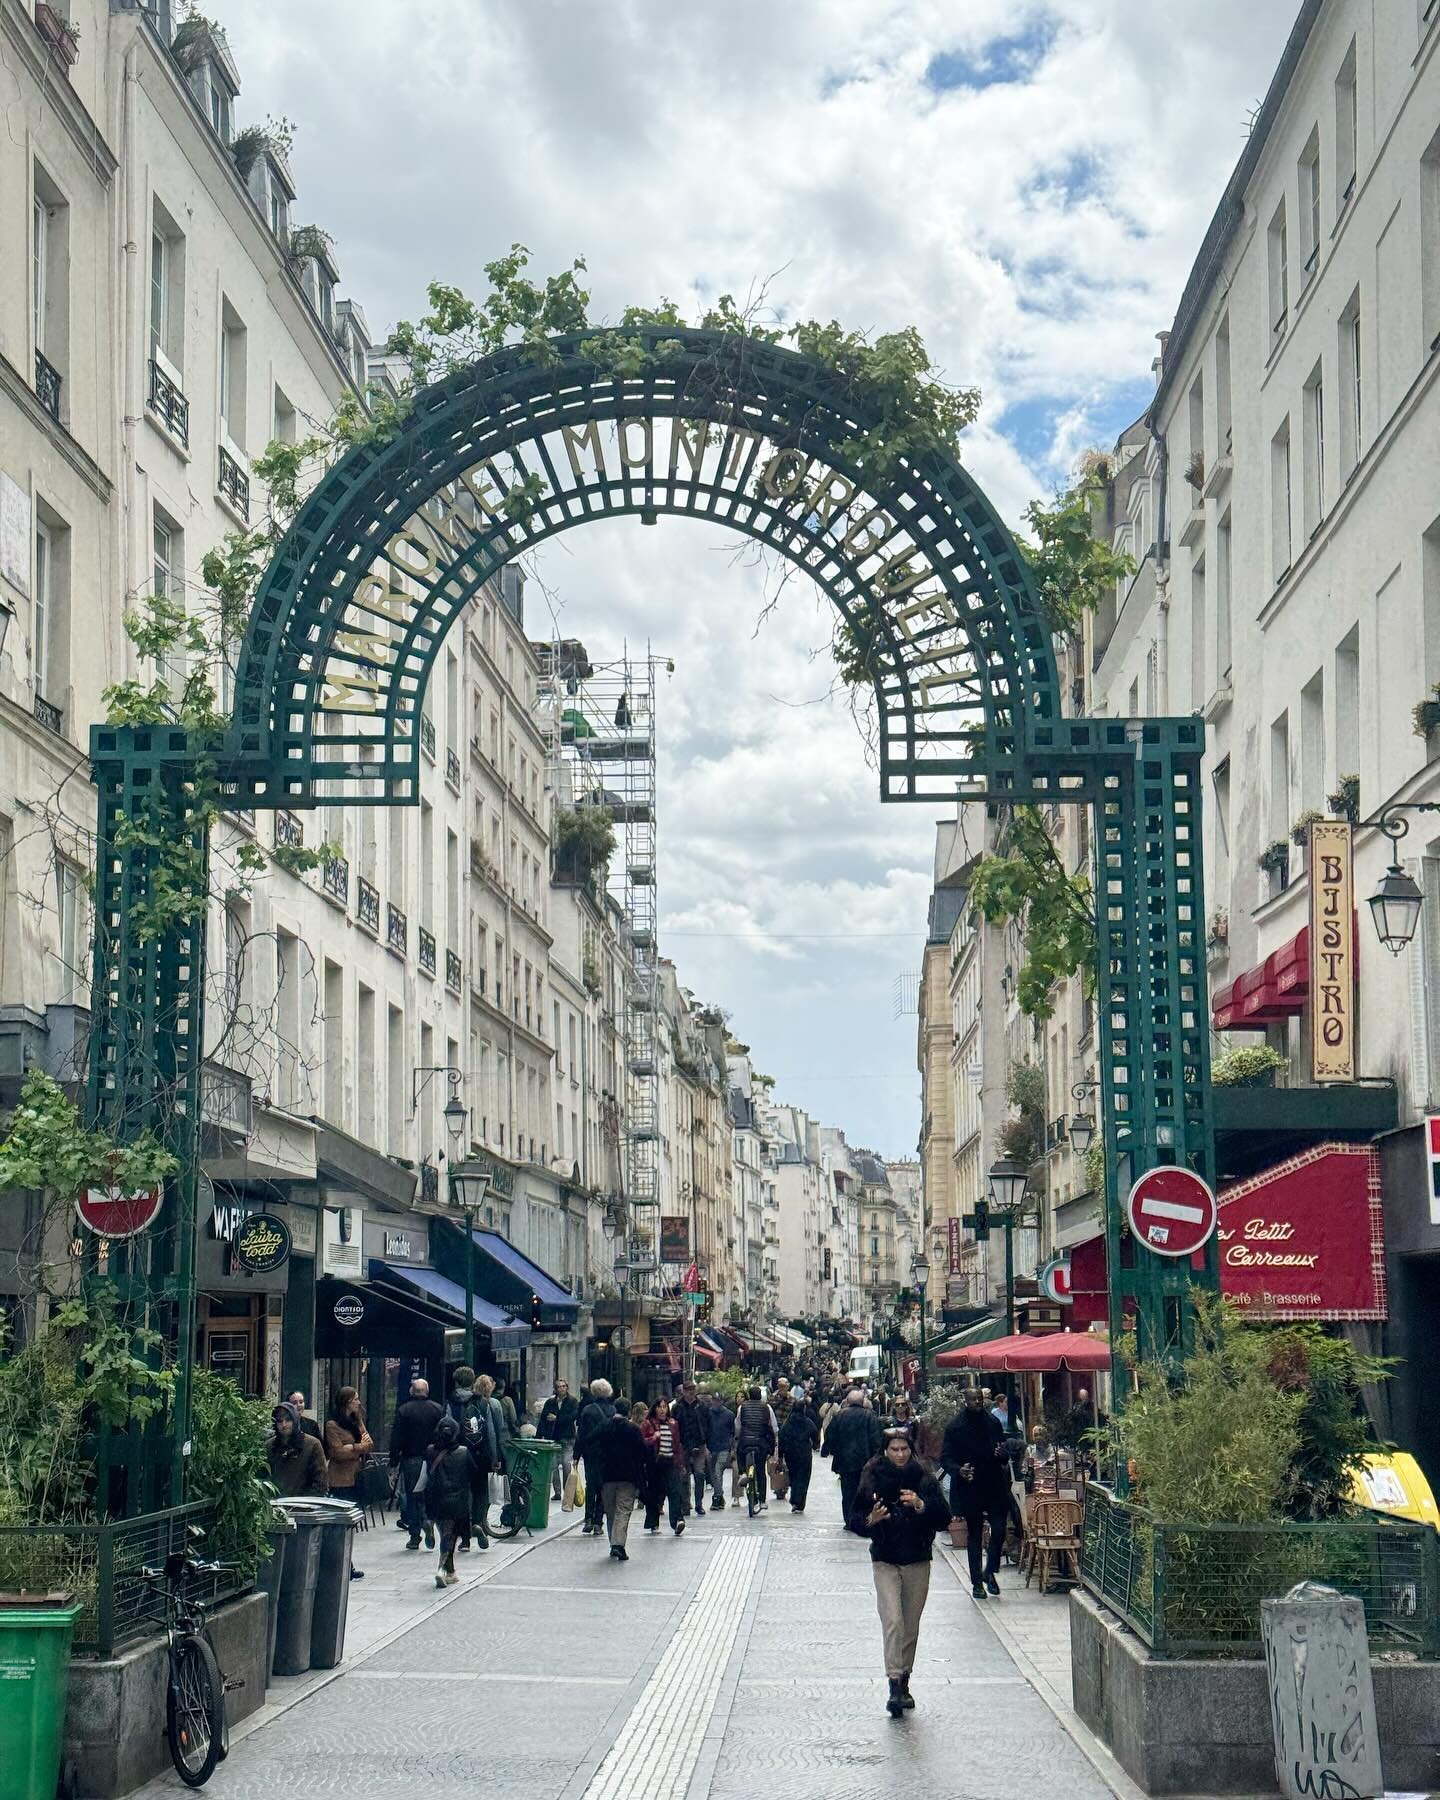 Took a walk down the Montorgueil today! 

This area known as Montorgueil is in the 2nd areondissment and is just south of the Sentier garment district. Not a lot of supply shops left in Sentier which is a bit sad as it always seems the old Paris is d